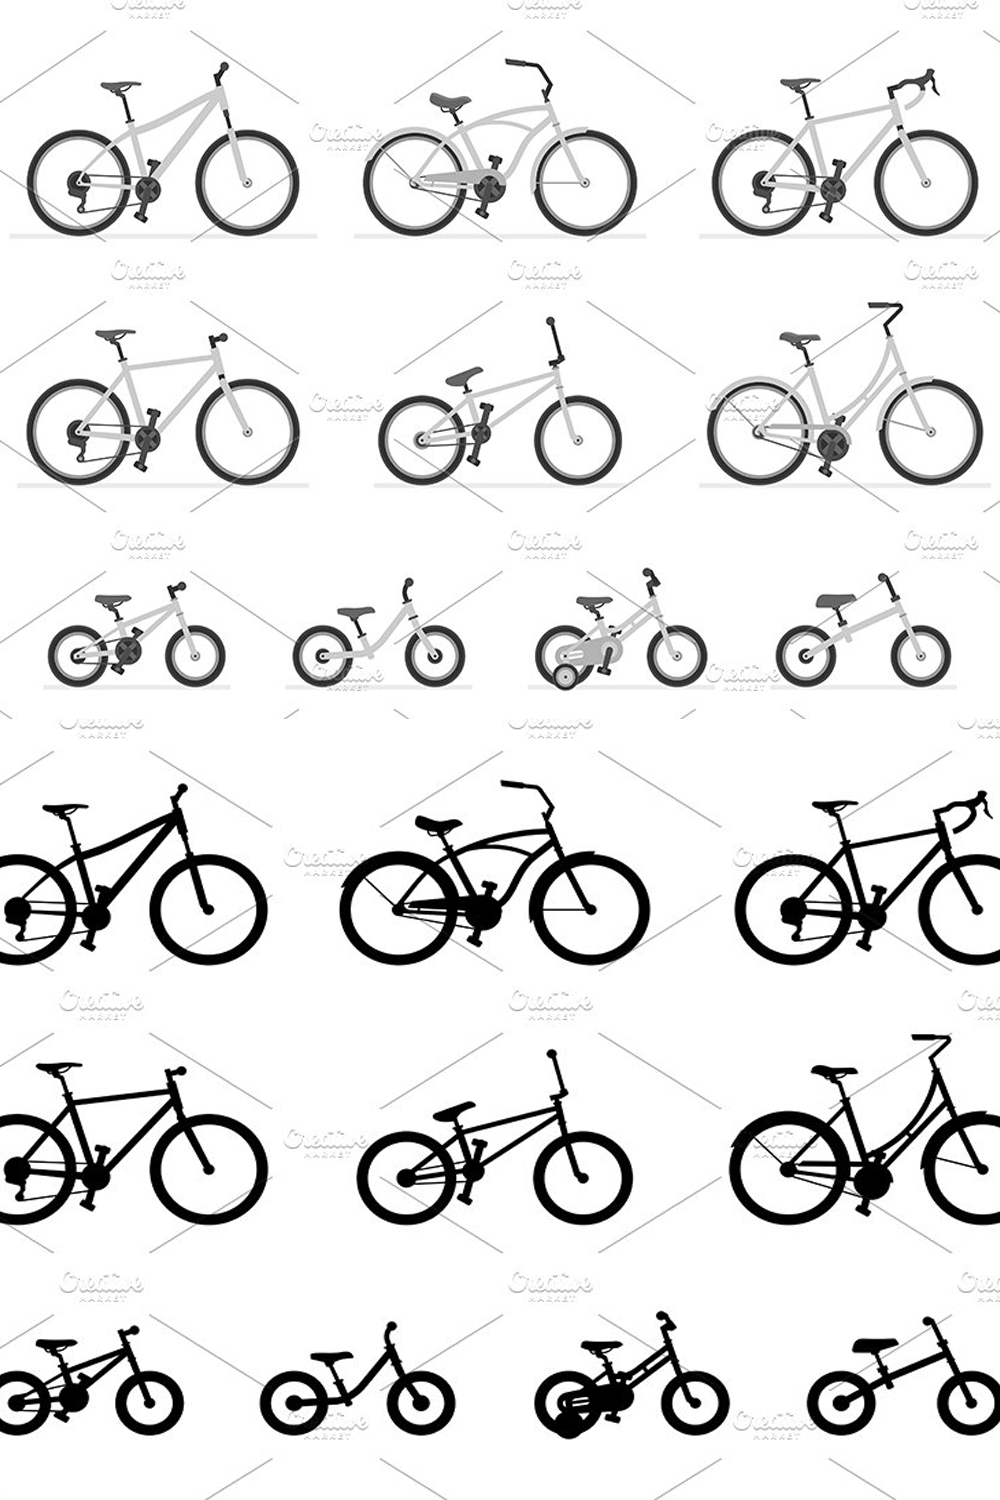 Illustrations set of different bicycles of pinterest.